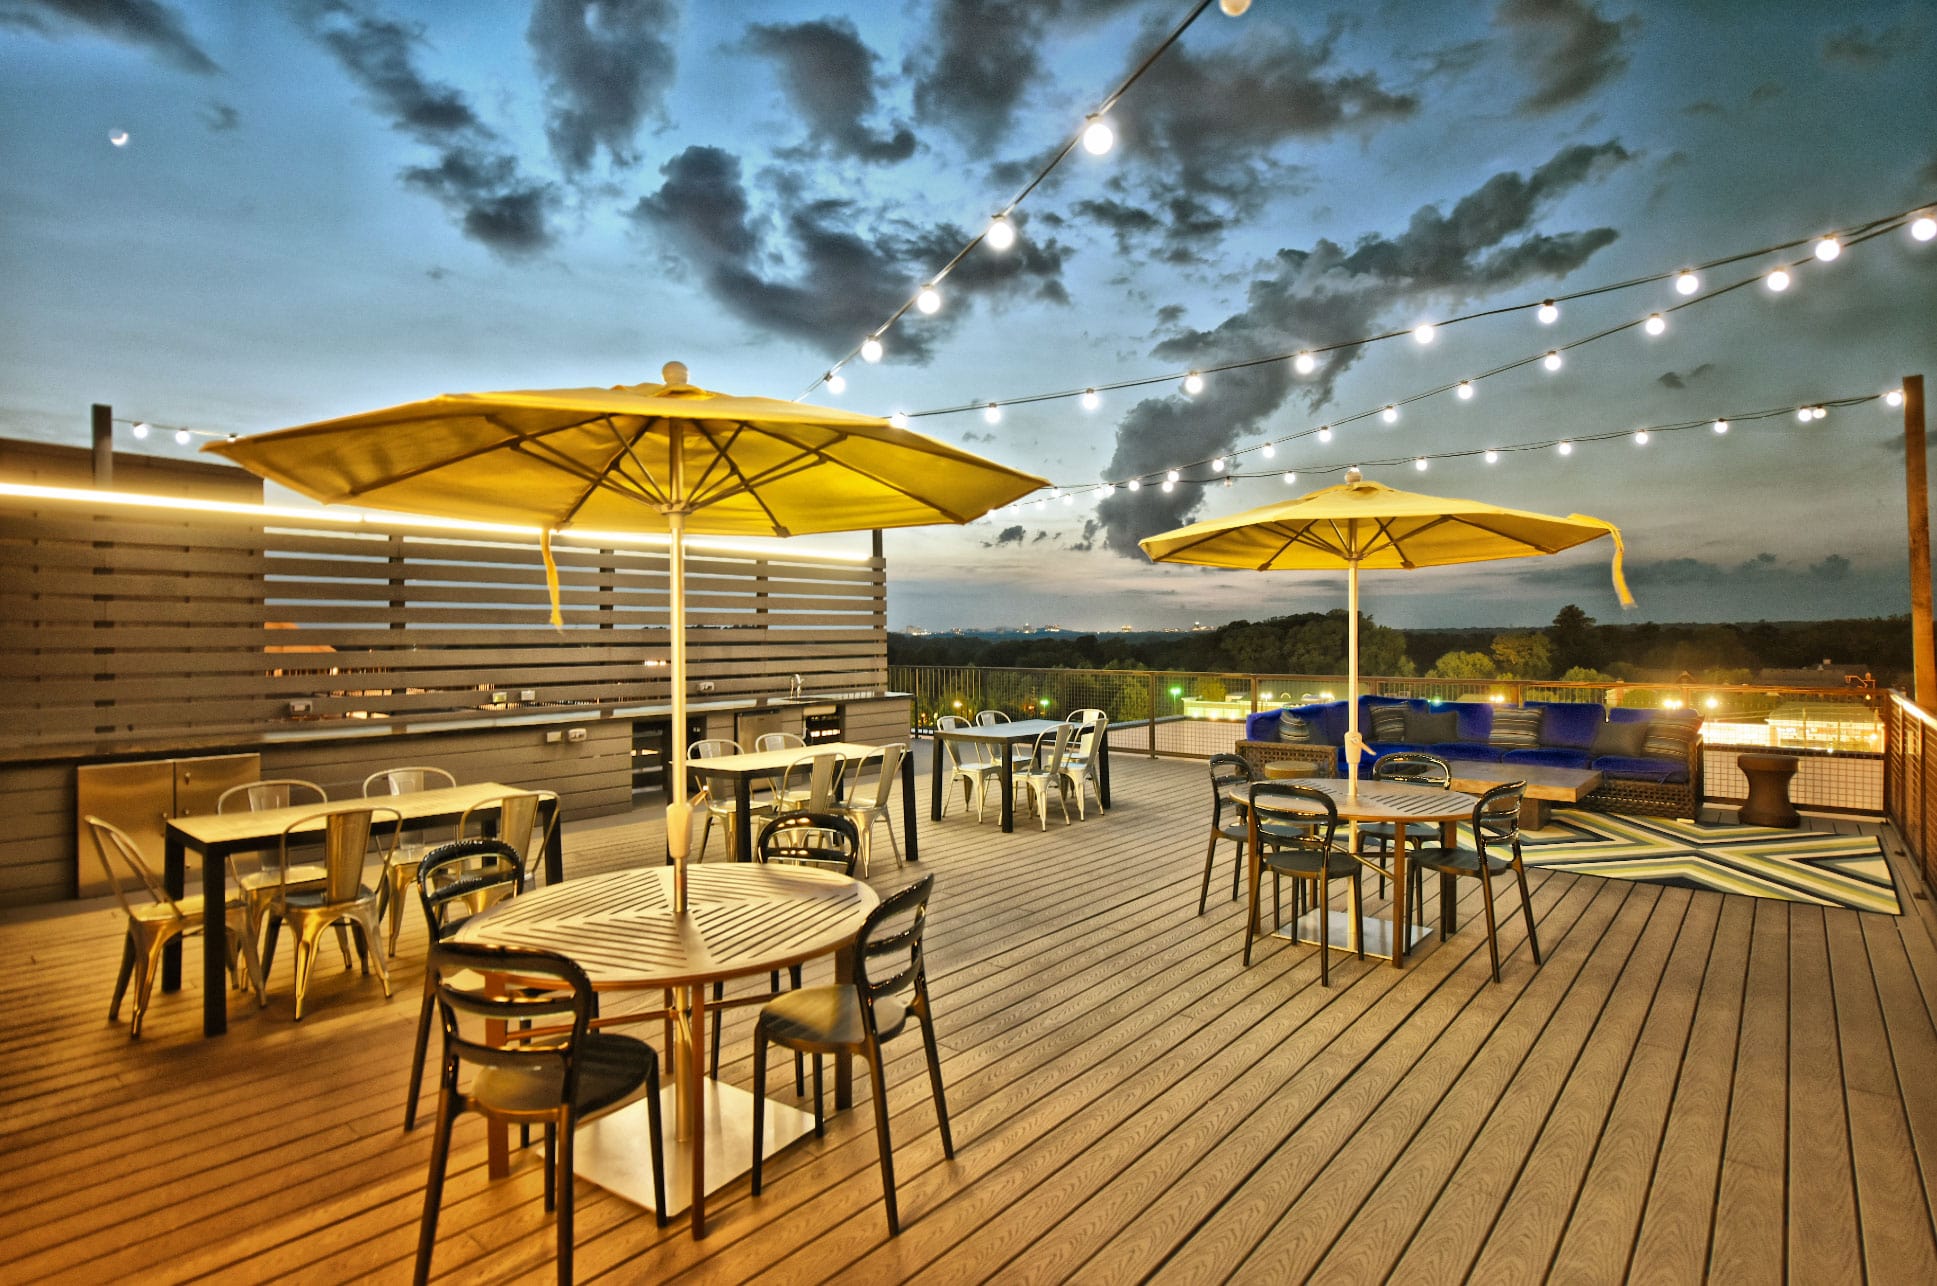 Rooftop amenity area with wood deck flooring, dining tables and chairs, umbrella coverings, patio lounge seating, overhead string lighting, and an outdoor kitchen wall